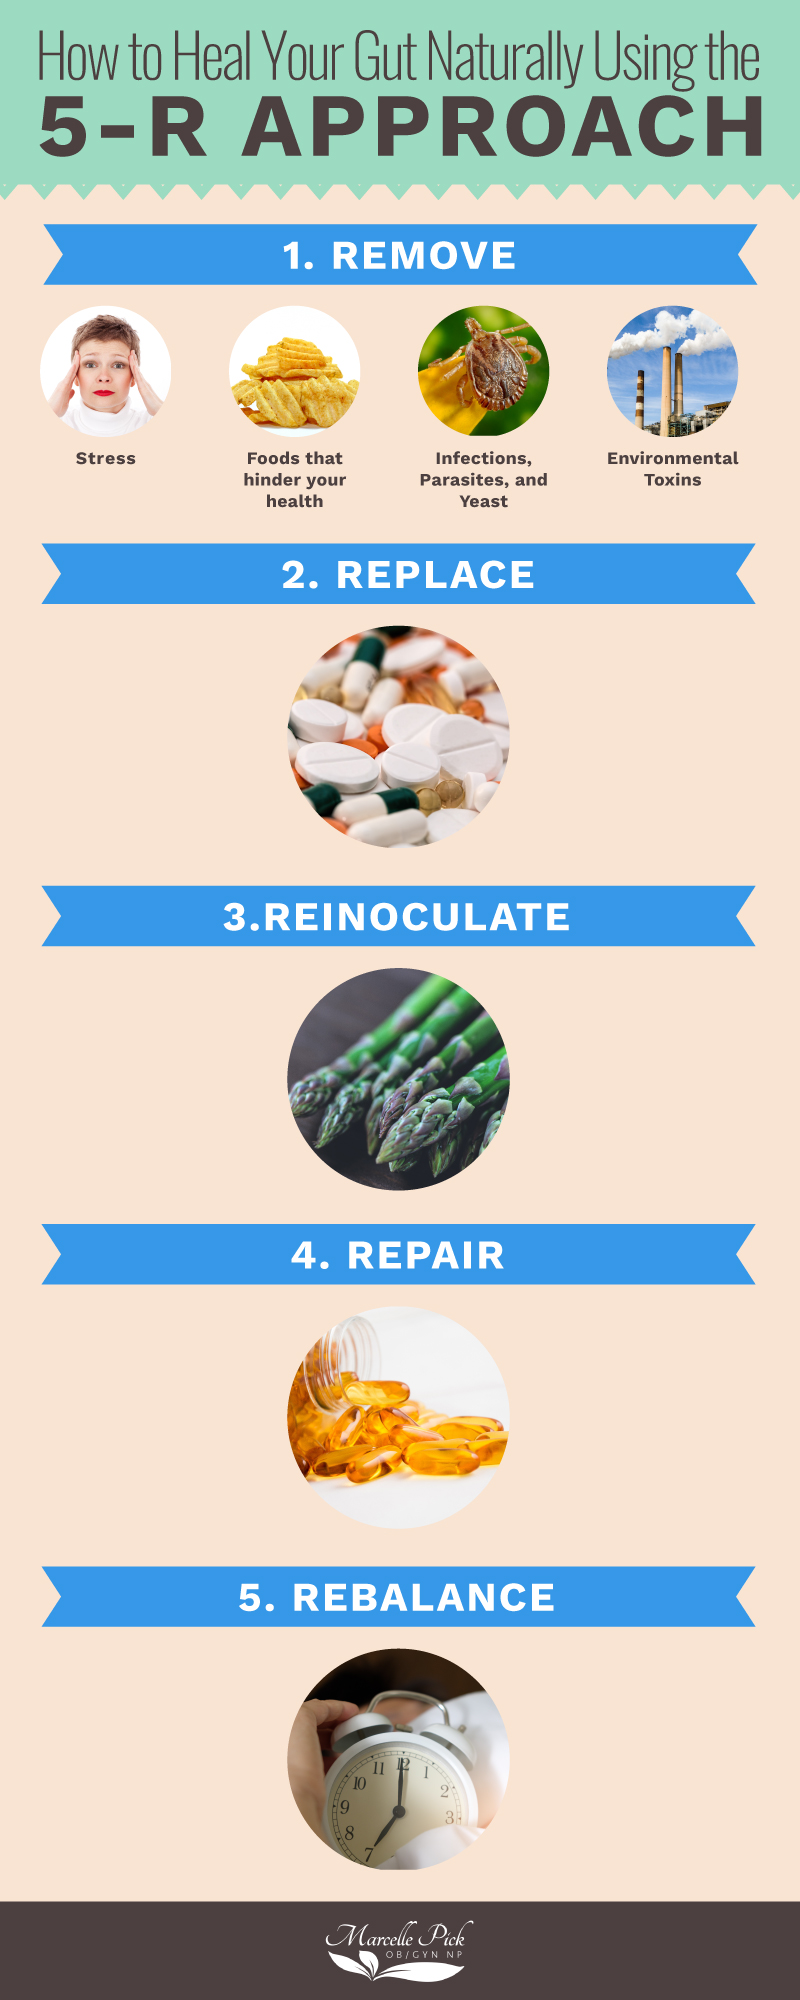 Heal your gut naturally using the 5-R approach infographic